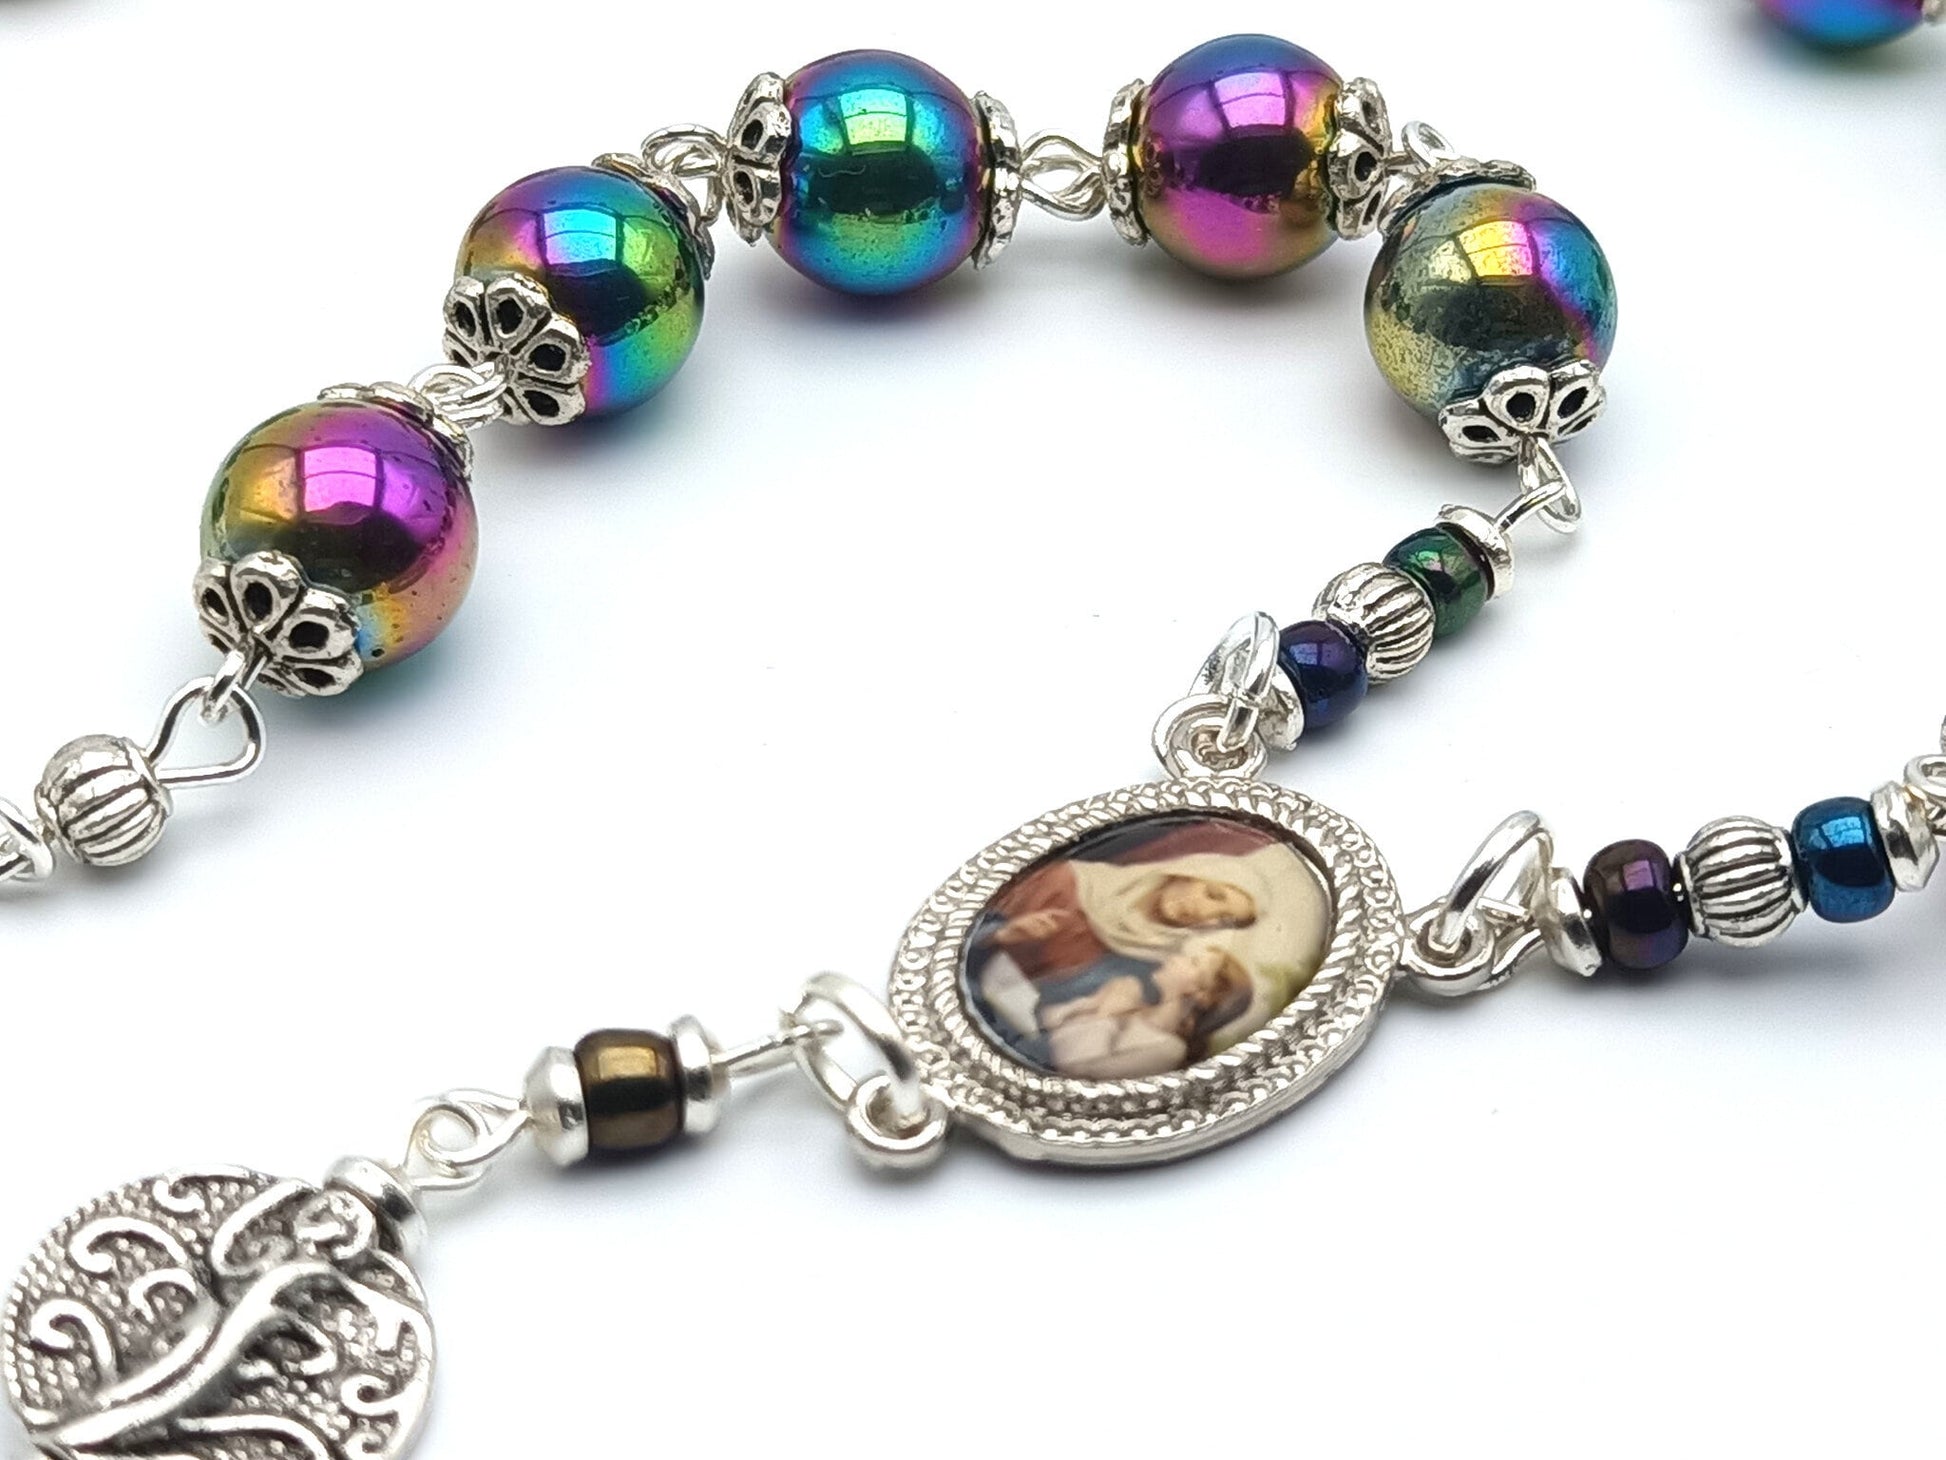 Saint Ann unique rosary beads prayer chaplet, with petrol coloured beads, silver picture centre medal, bead caps and Saint Ann medal.